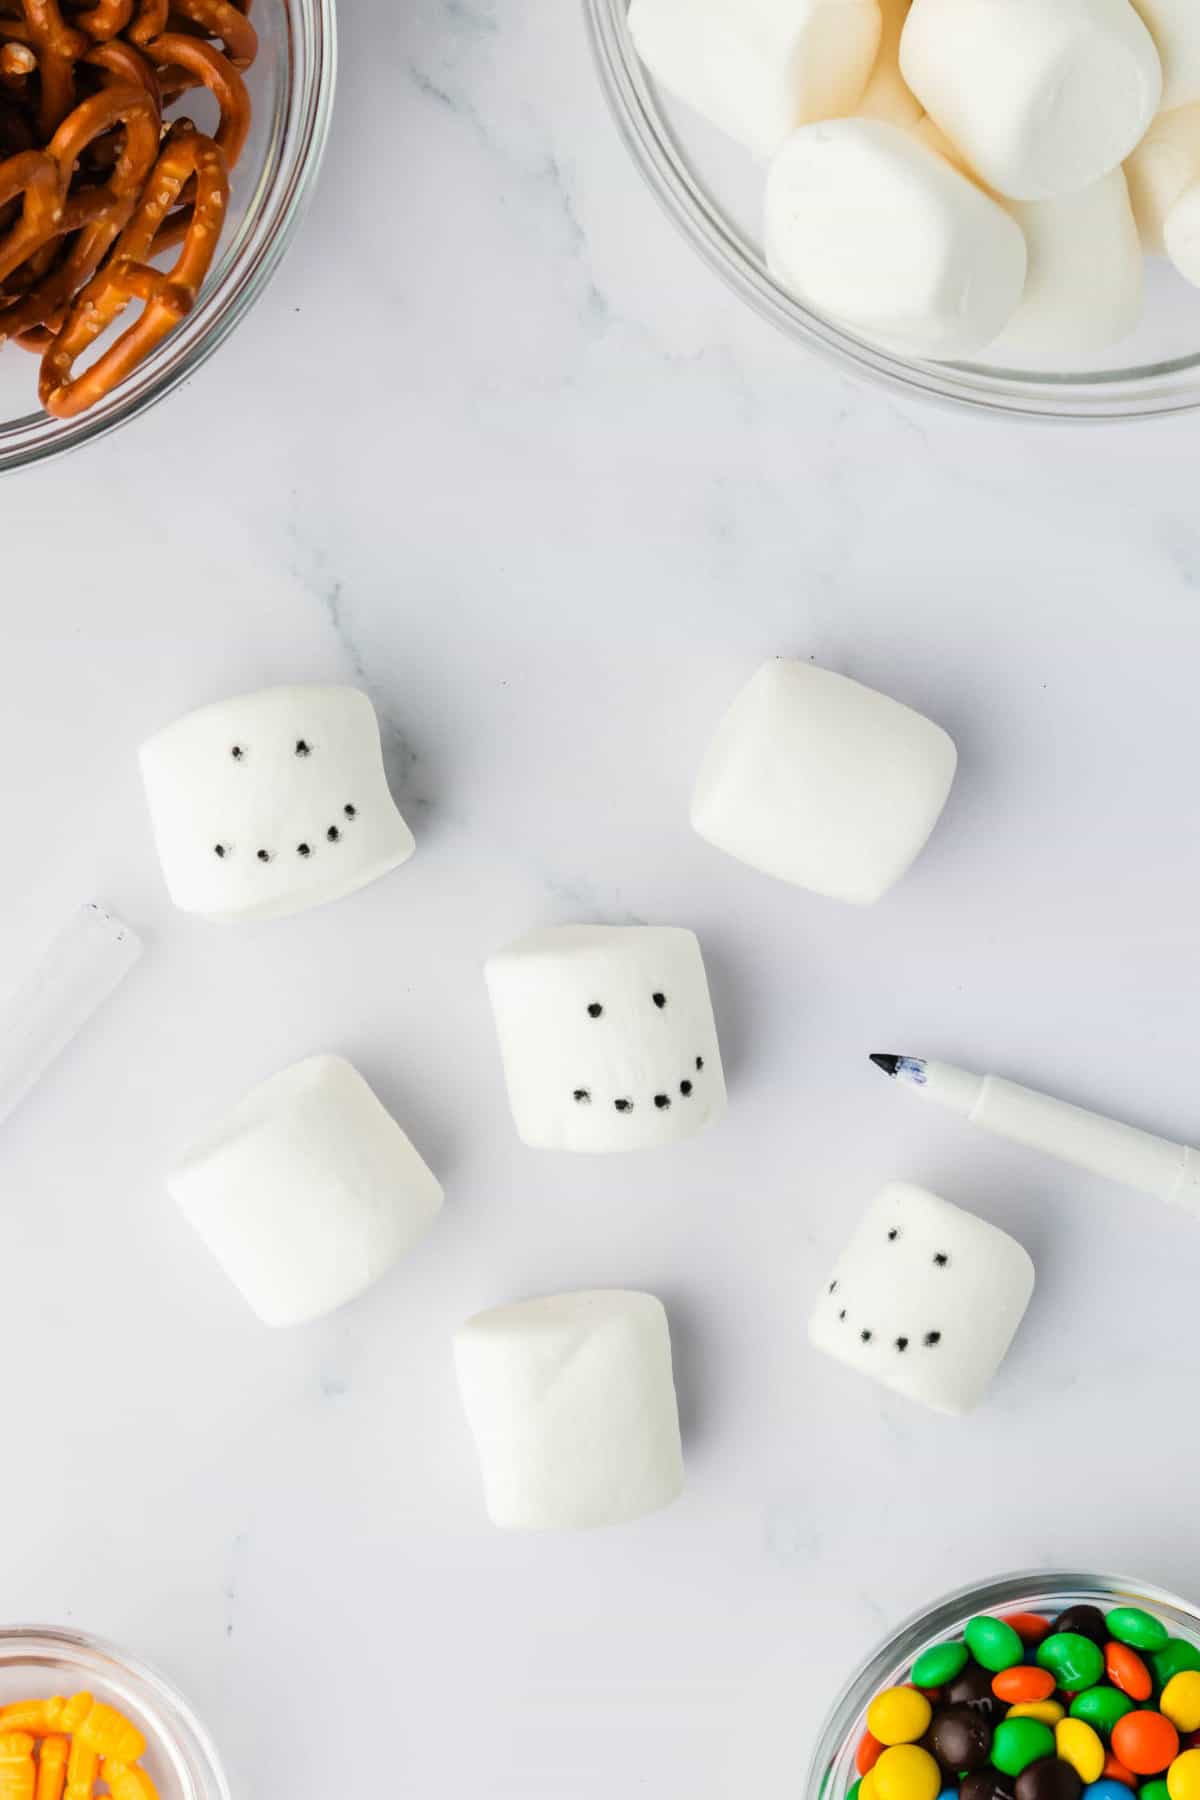 Take a Food Marker and put Dots for Eyes and a Mouth on the Marshmallows.